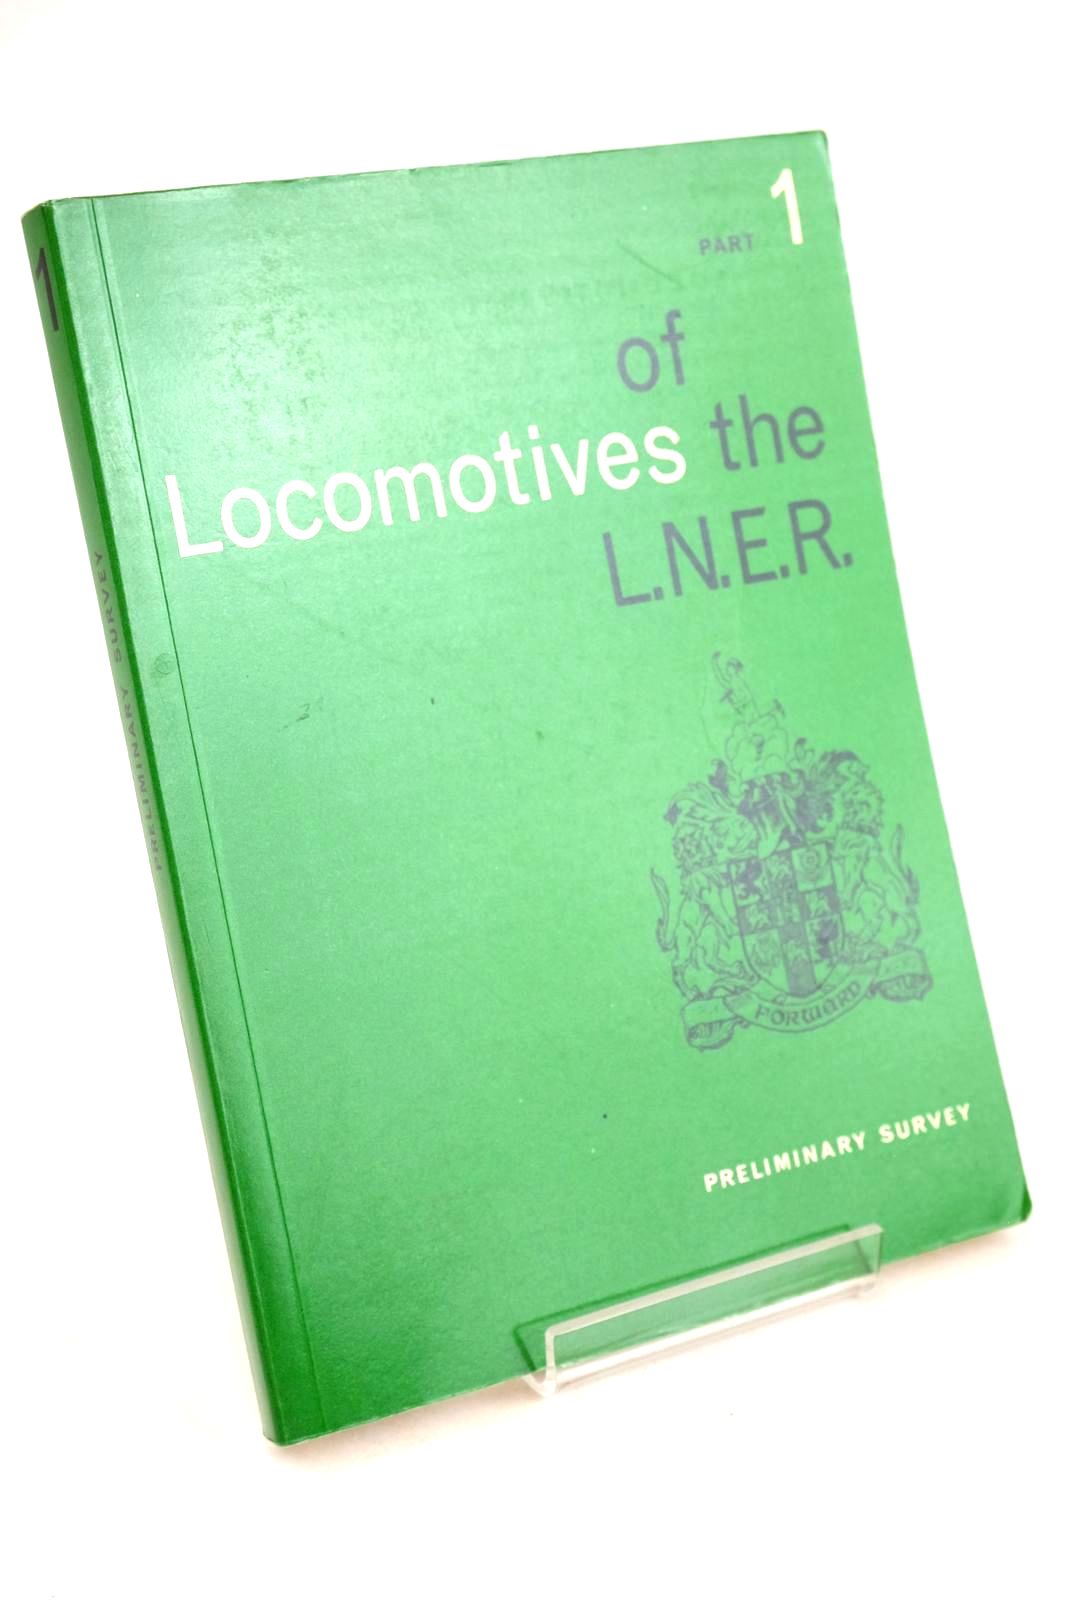 Photo of LOCOMOTIVES OF THE L.N.E.R. PART 1 published by The Railway Correspondence And Travel Society (STOCK CODE: 1327350)  for sale by Stella & Rose's Books